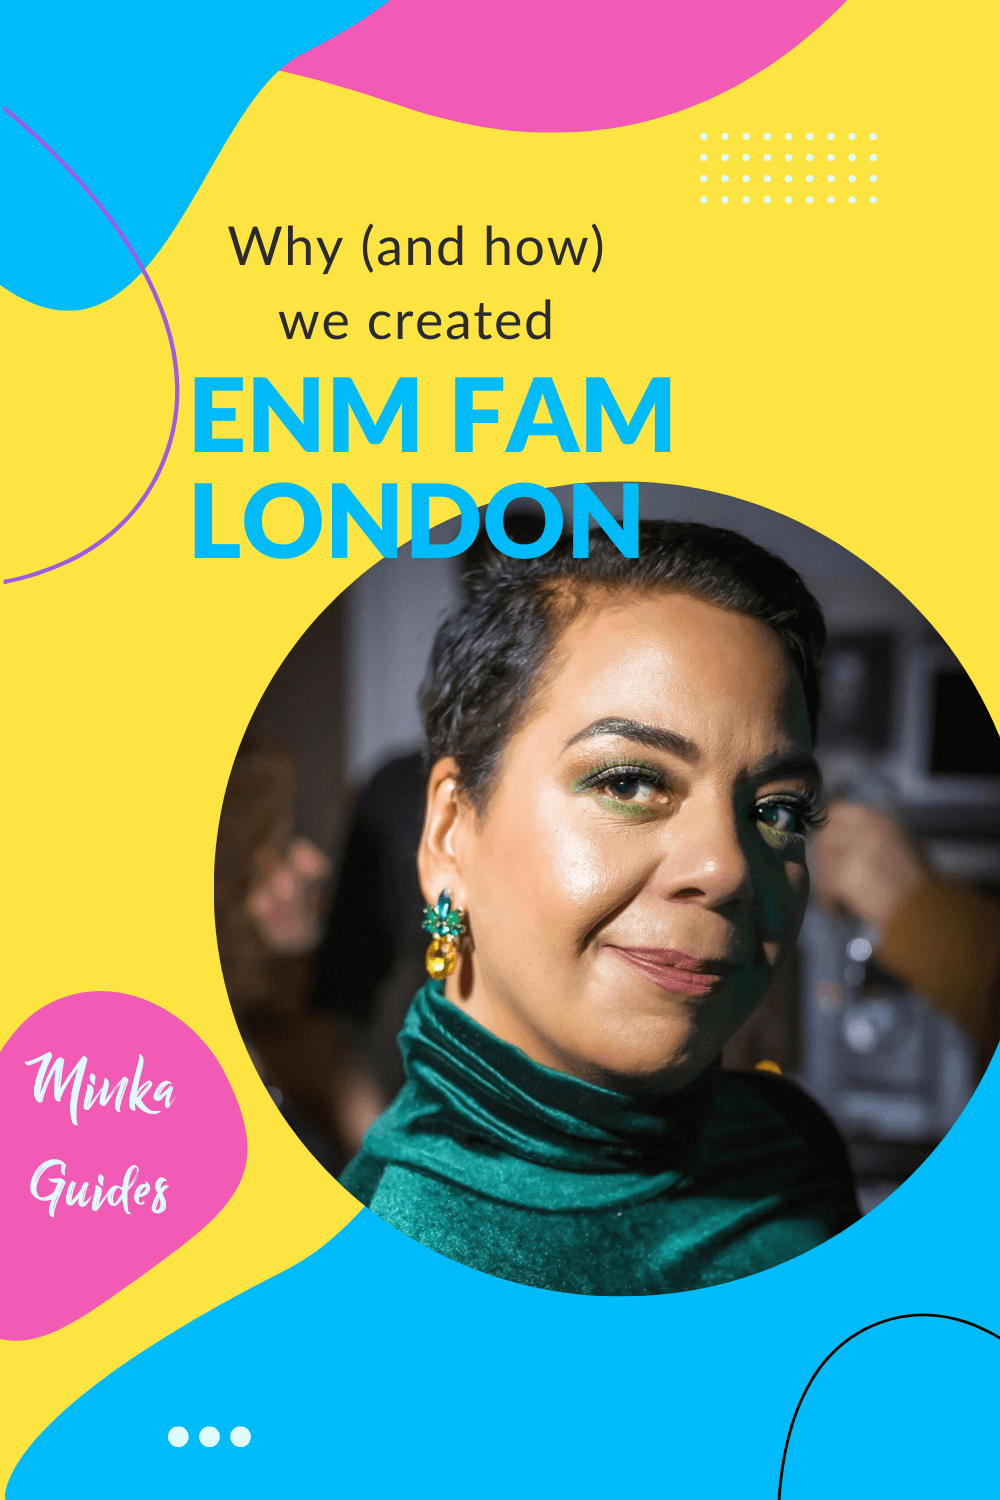 Why (and how) we created ENM Fam London | Minka Guides